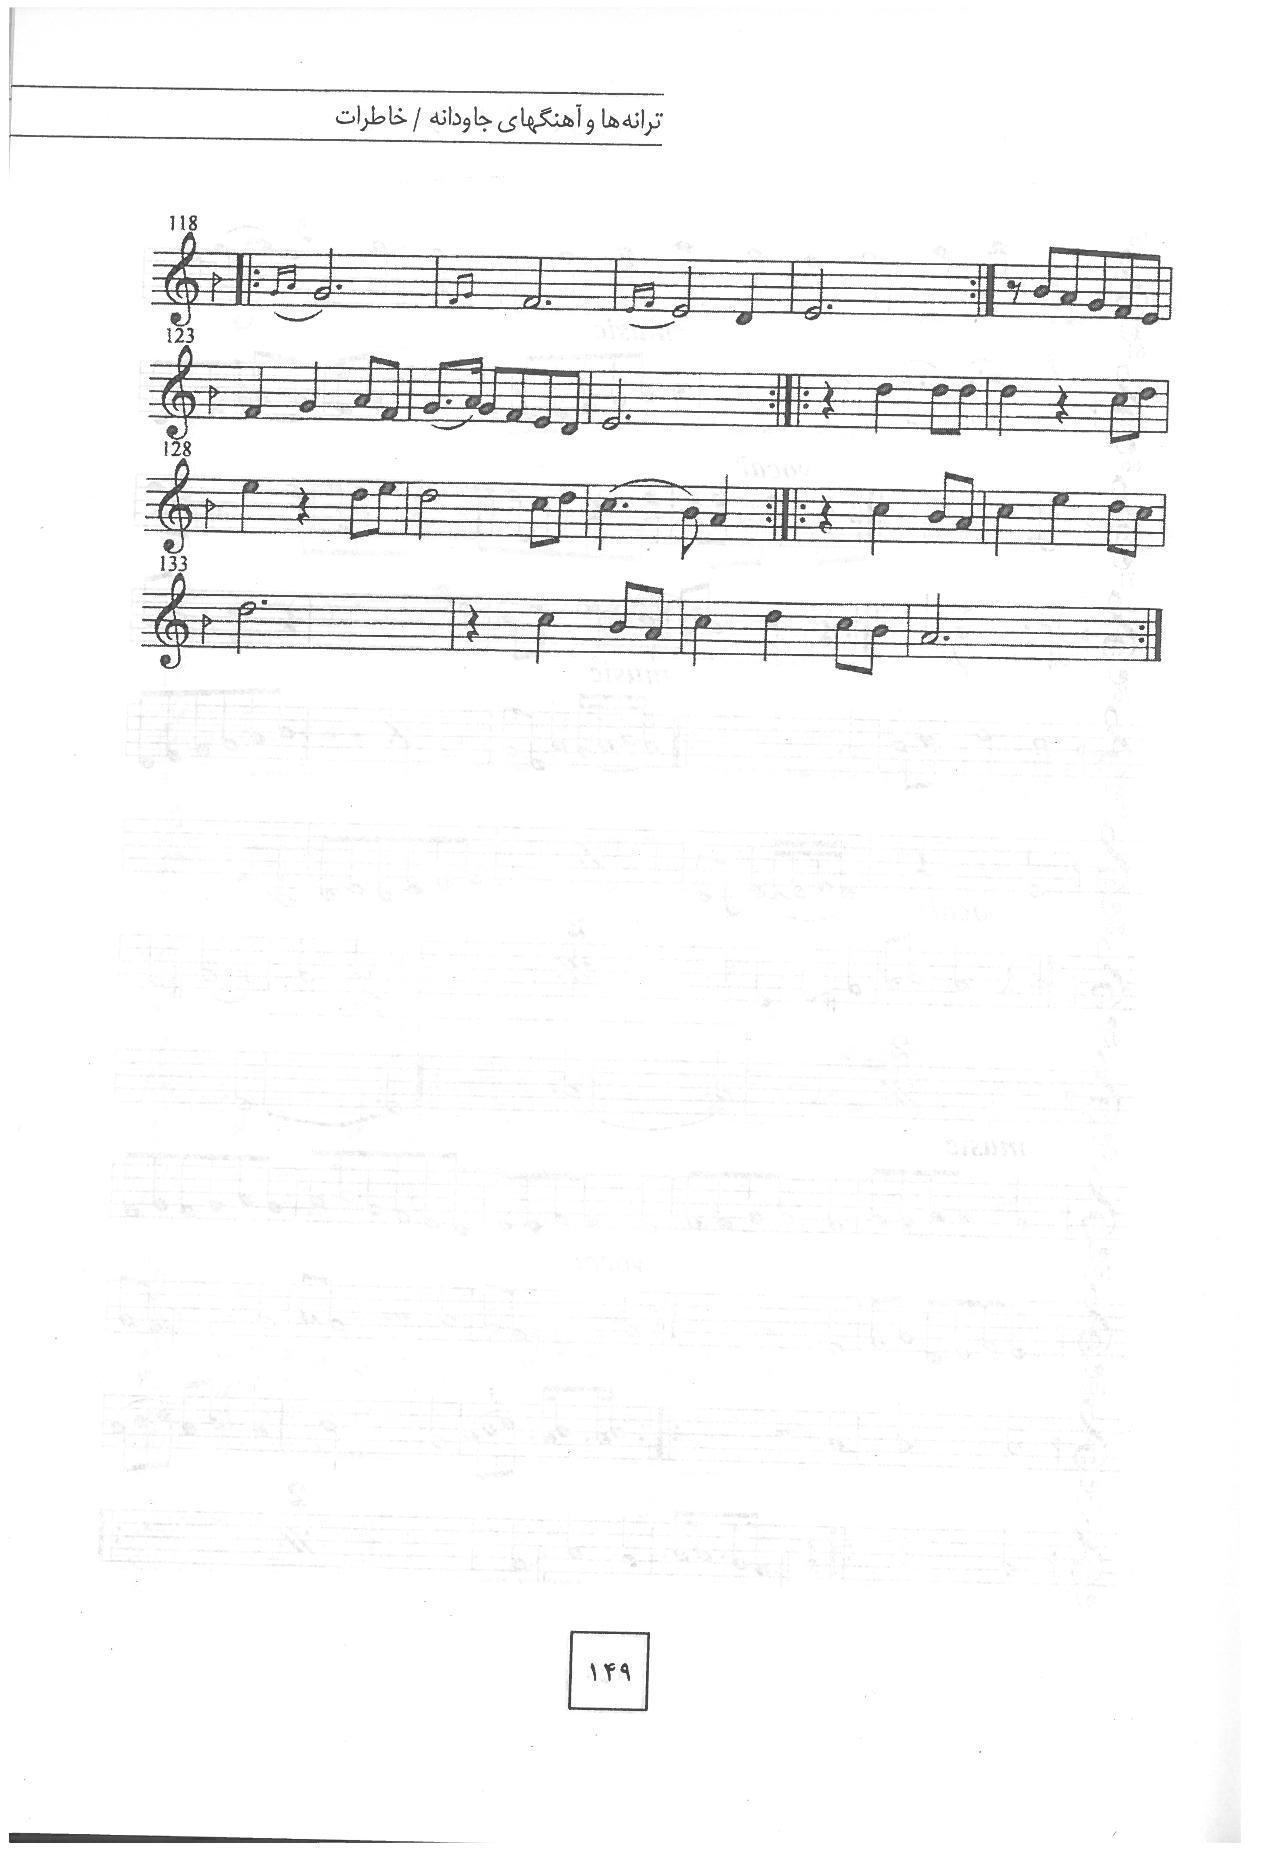 A sheet music page with some notes on it